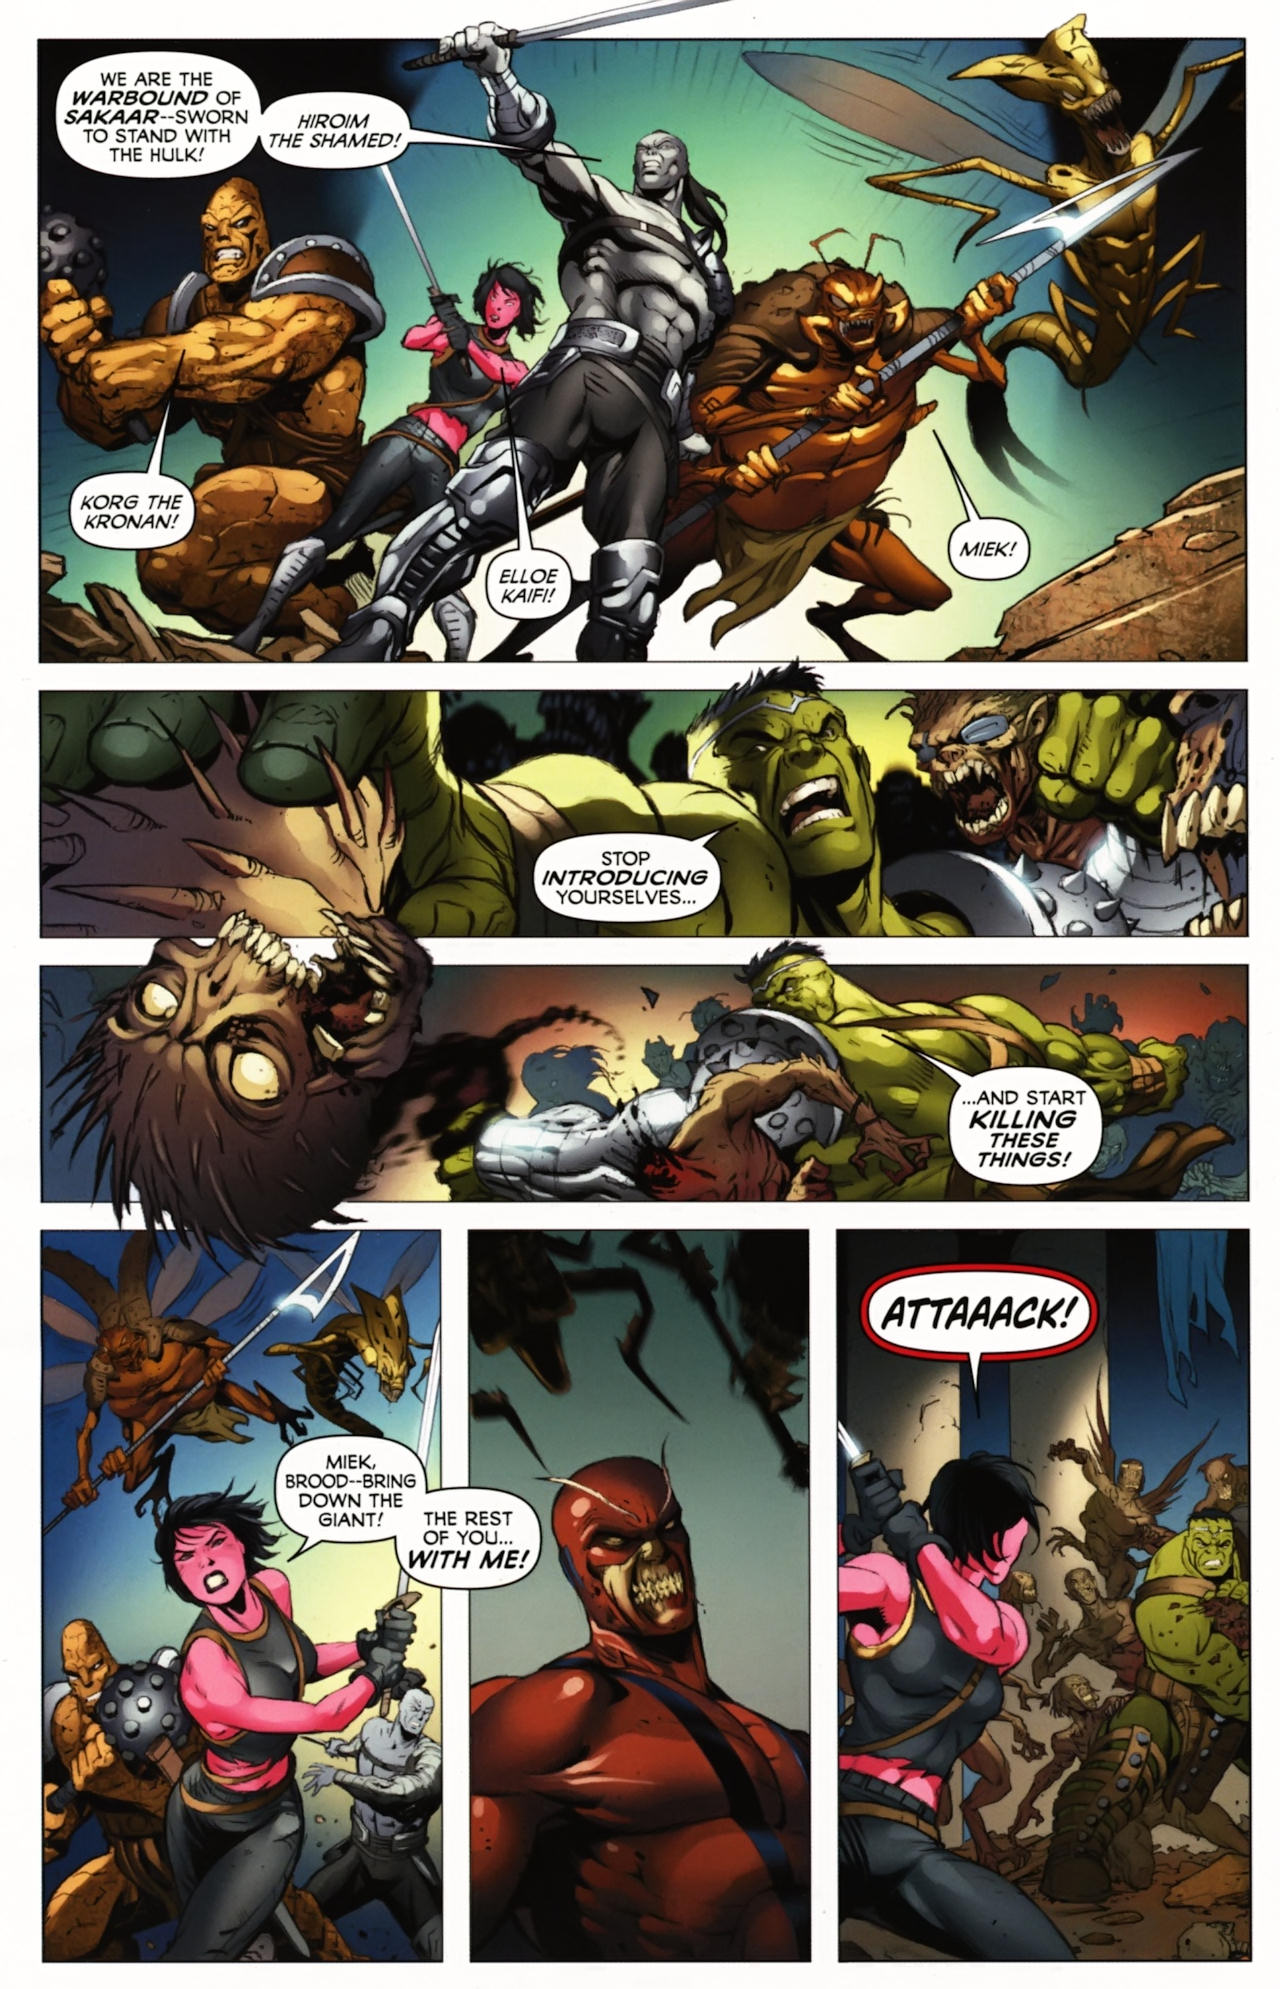 Marvel Zombies - The Return 04 of 05